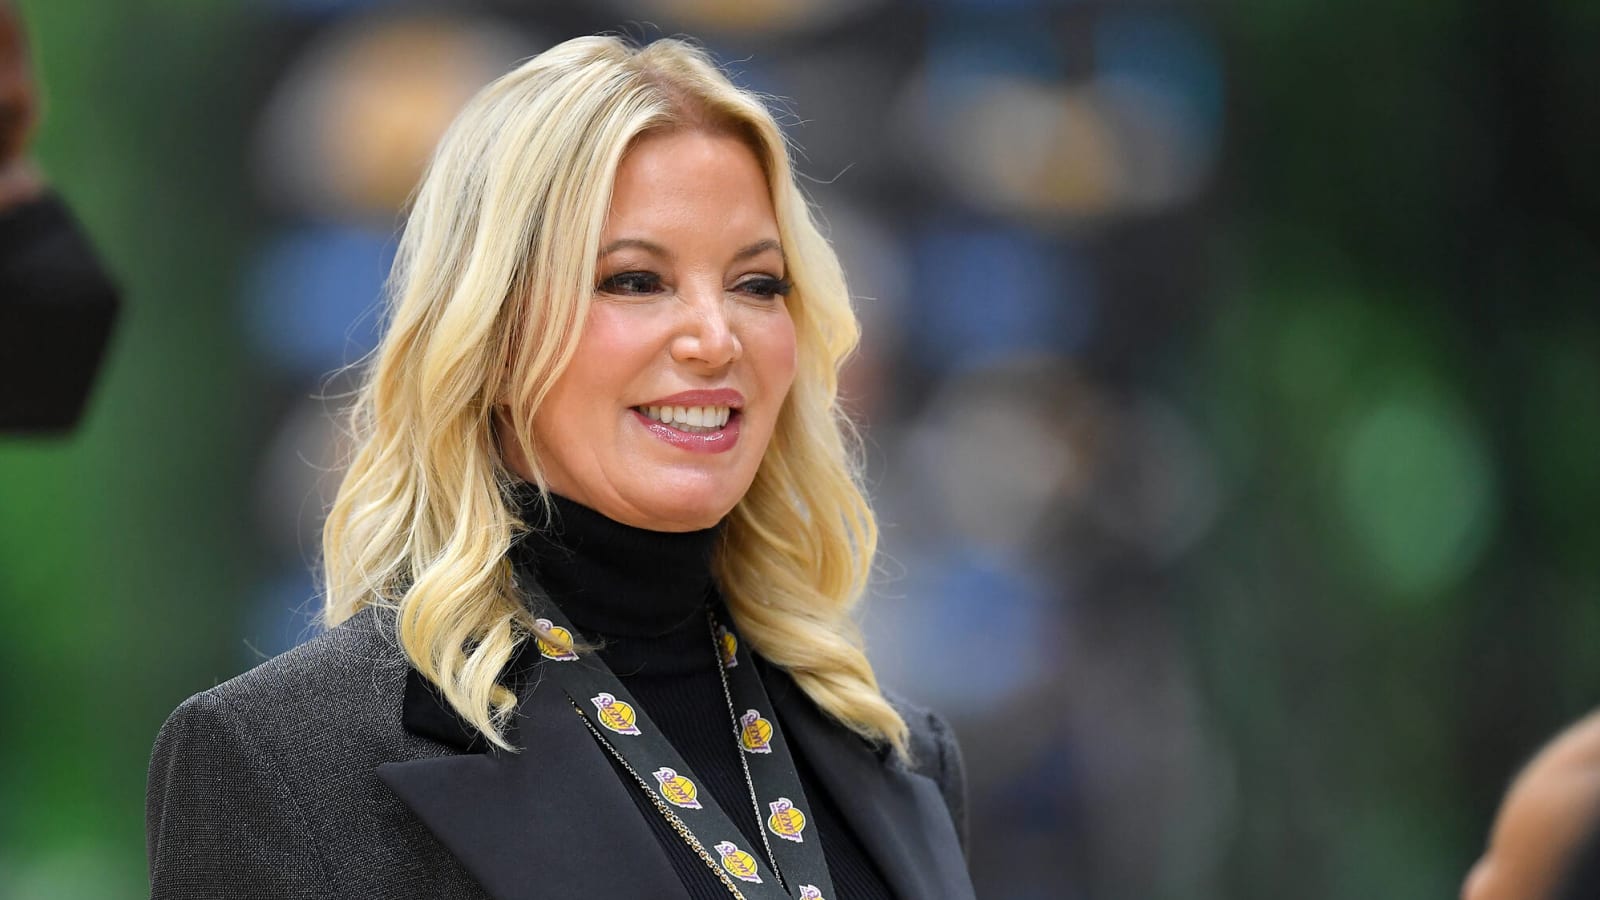 NBA Fans React To Jeanie Buss Saying Michael Jordan Is The GOAT, Not LeBron James: "When Owner Said That Her Player Is Not The GOAT, It Is The End Of Debate"